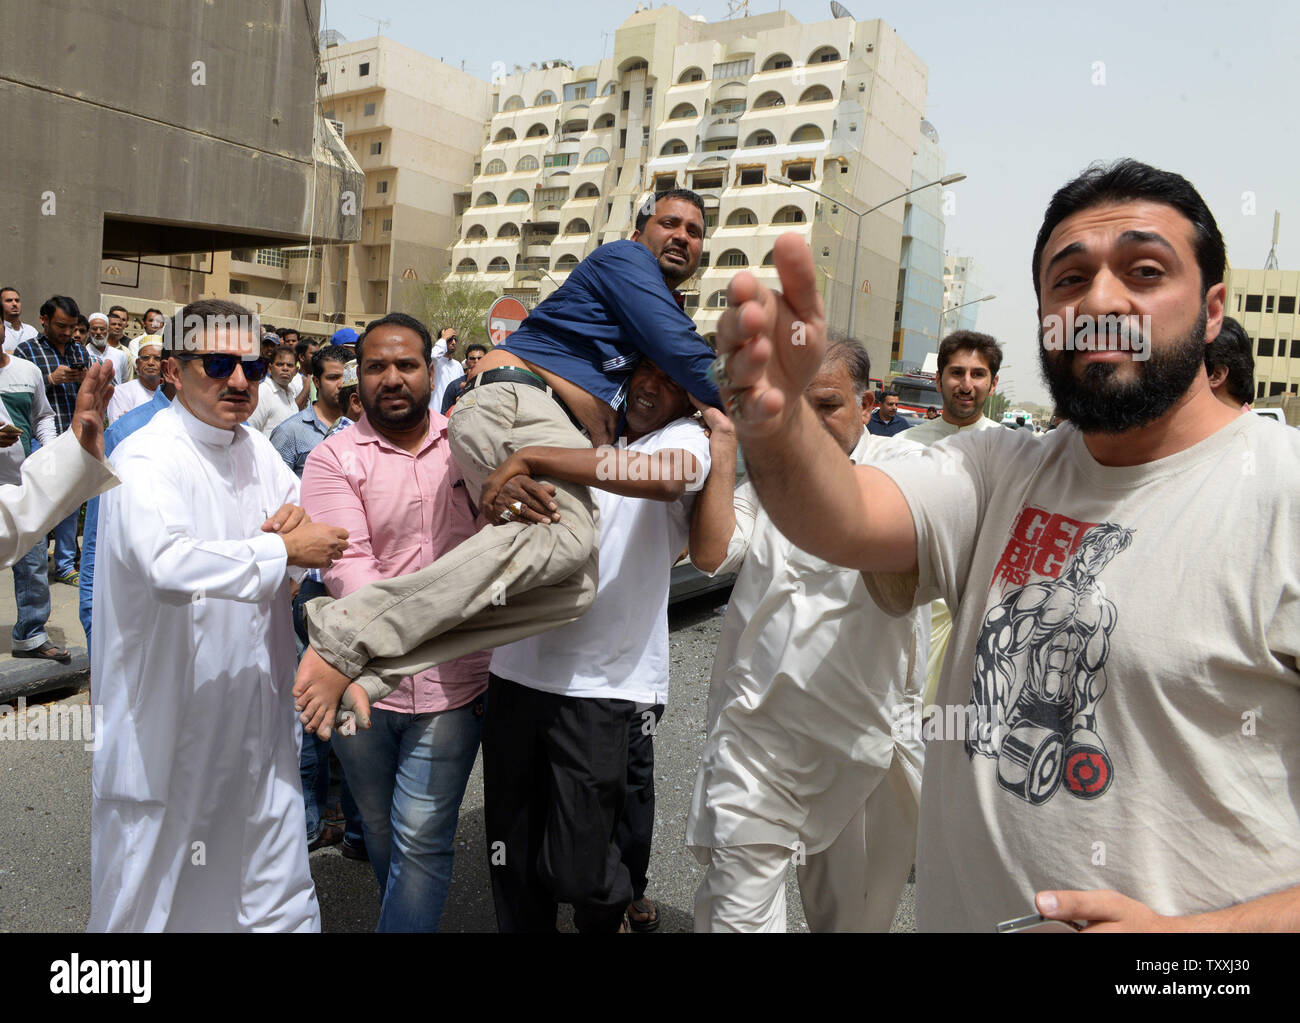 Kuwaitis help a wounded man at the Imam Sadiq Mosque after a deadly explosion claimed by the Islamic State group during Friday prayers in Kuwait City, June 26, 2015. At least 25 people were killed and 202 others wounded when a suicide bomber targeted the Friday prayers at a Shia mosque in Kuwait City medical sources and human rights activists said. Photo by Raed Qutena/UPI Stock Photo